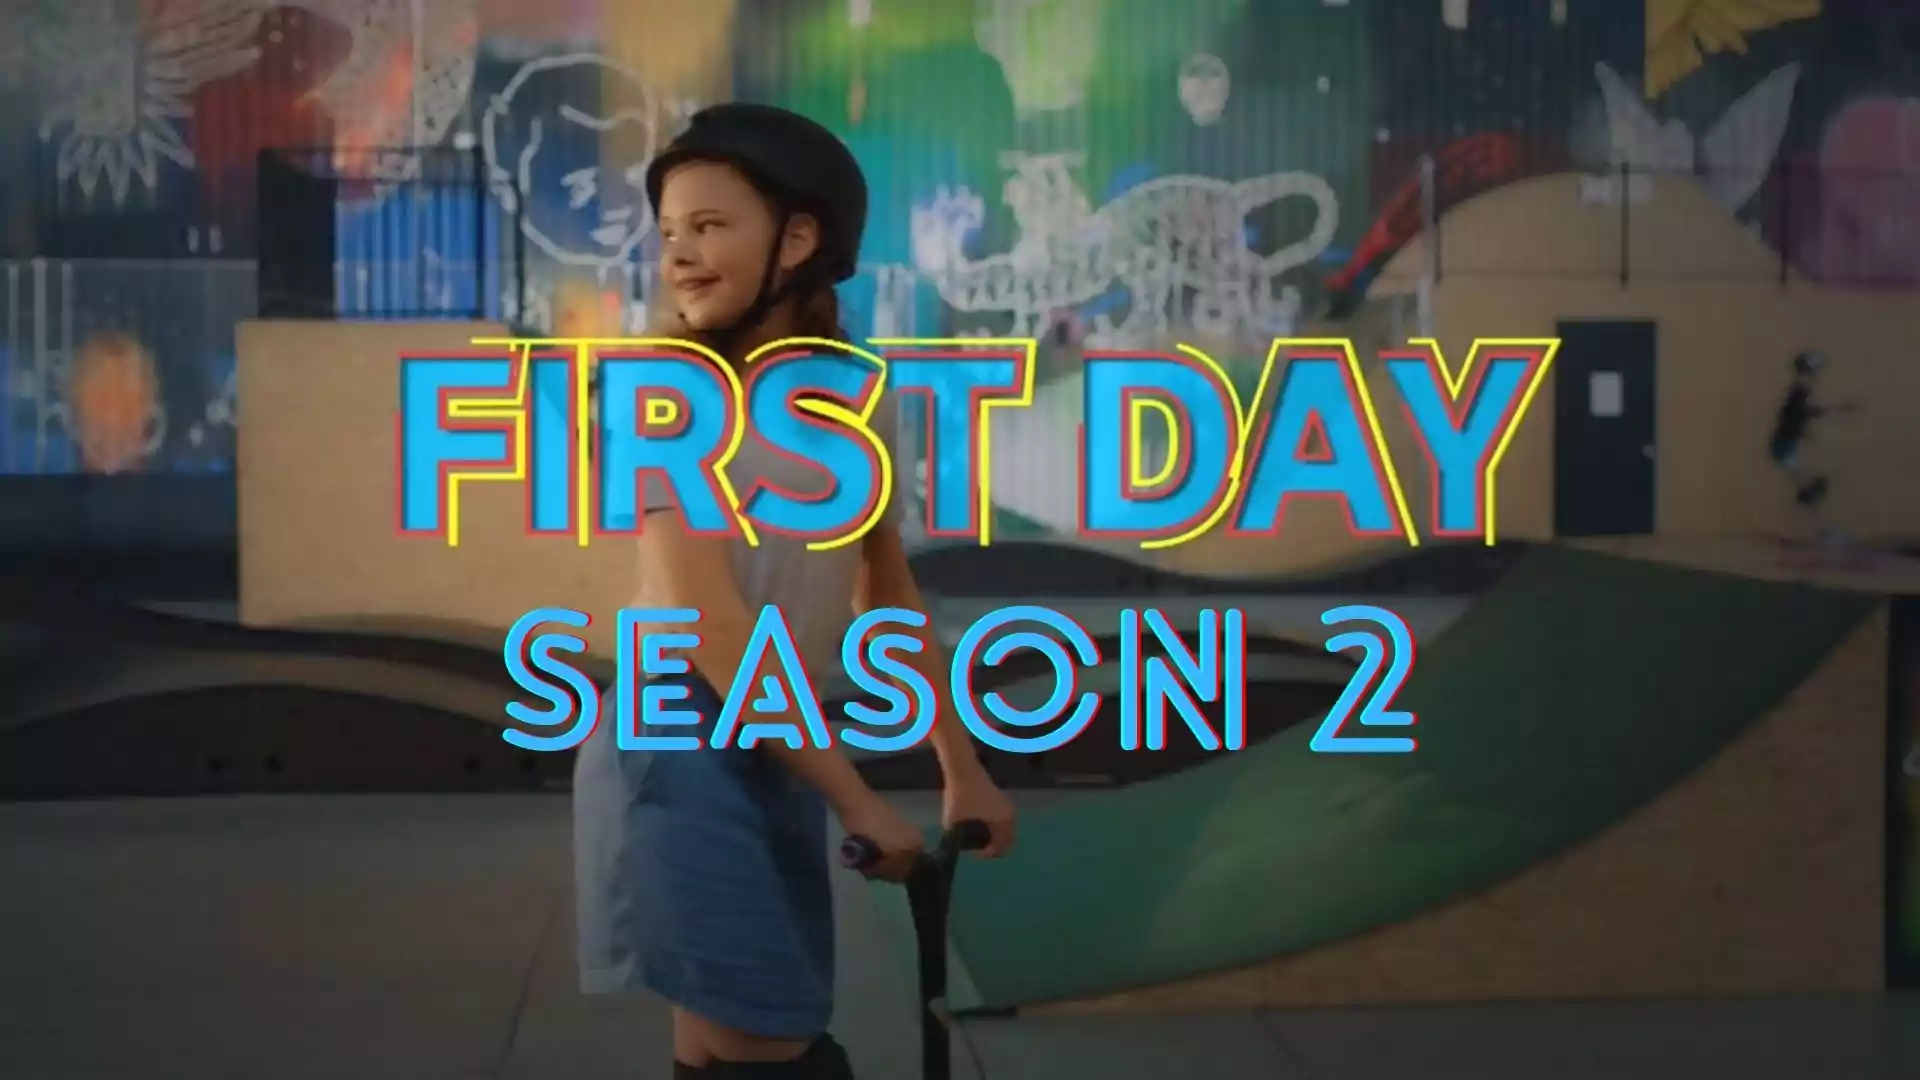 First Day Parents Guide. First Day Age Rating. Mini Series First Day season 2 release date Hulu. First Day cast, production, synopsis, trailer